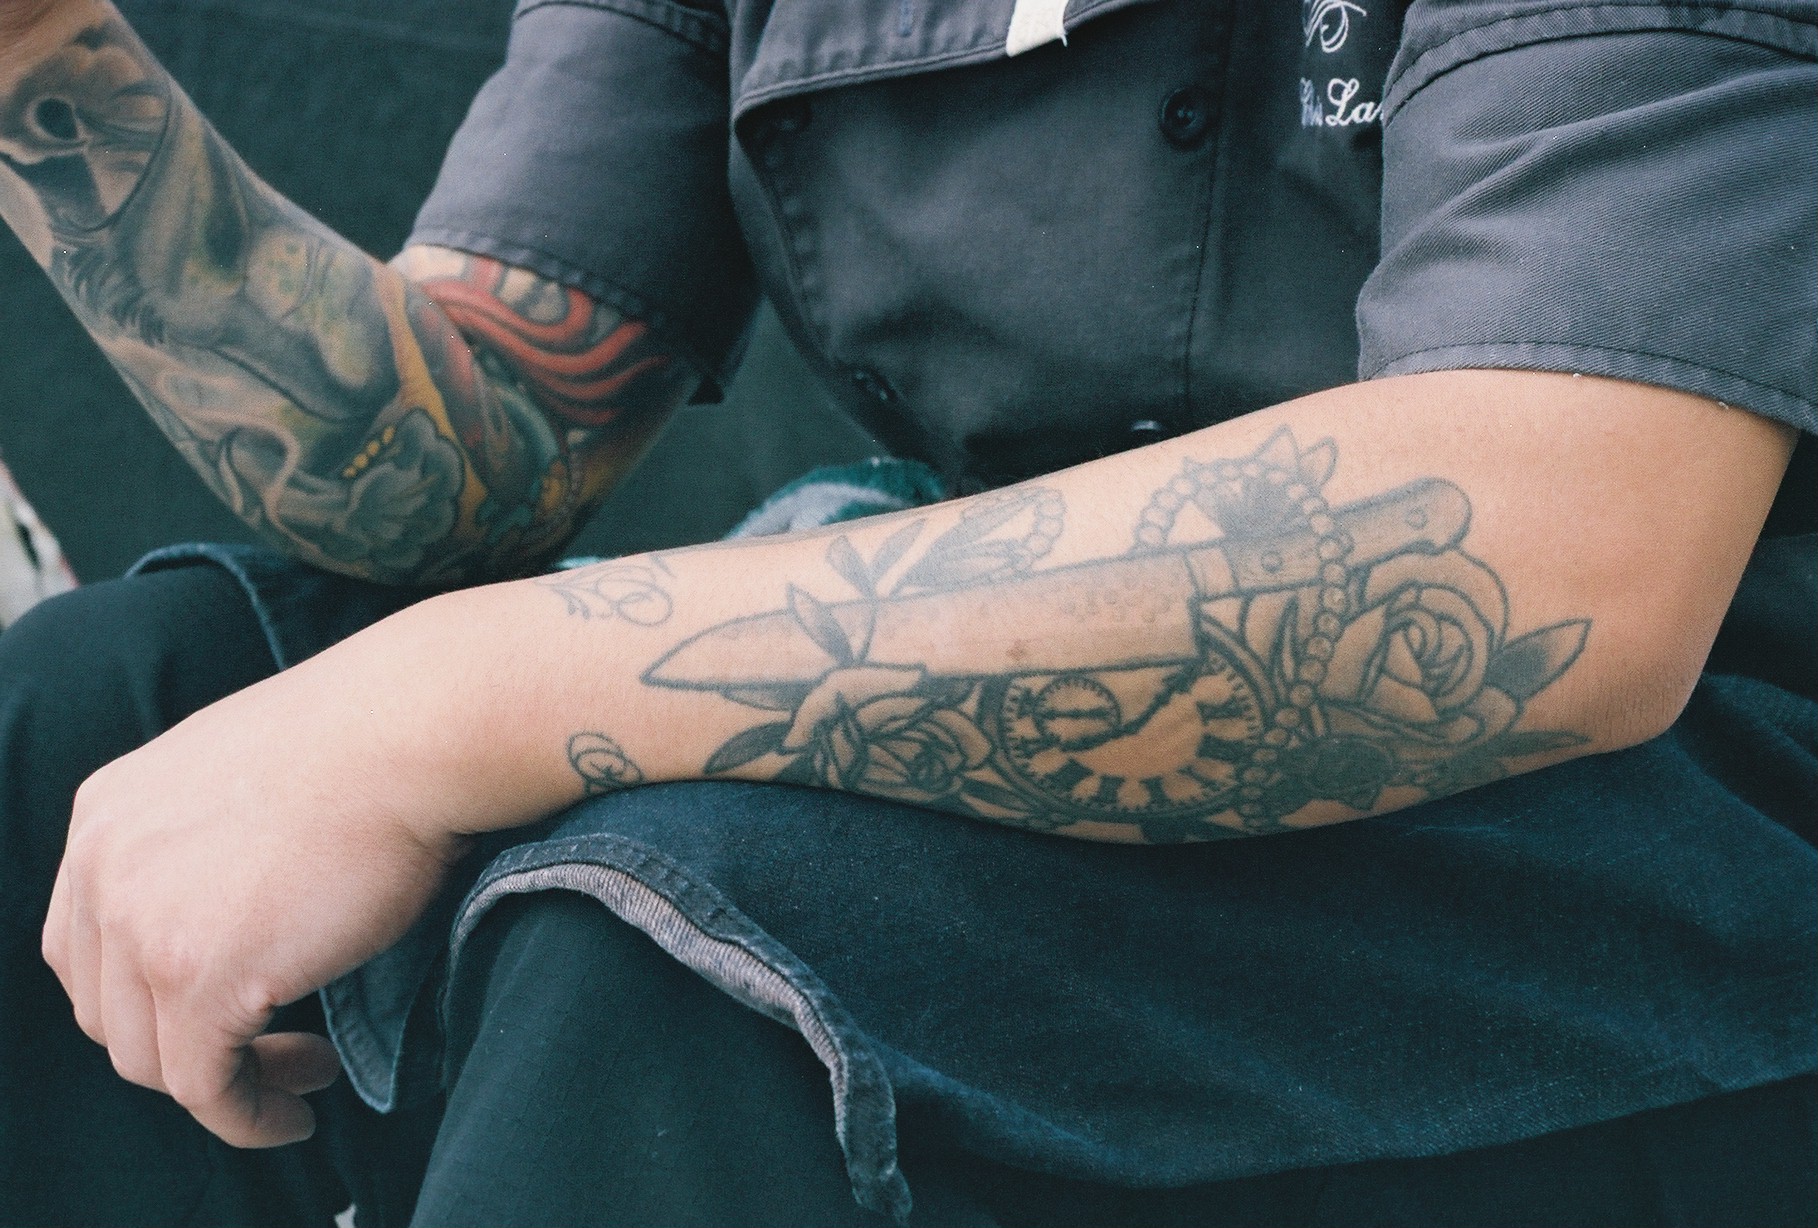 Why do chefs have so many tattoos?